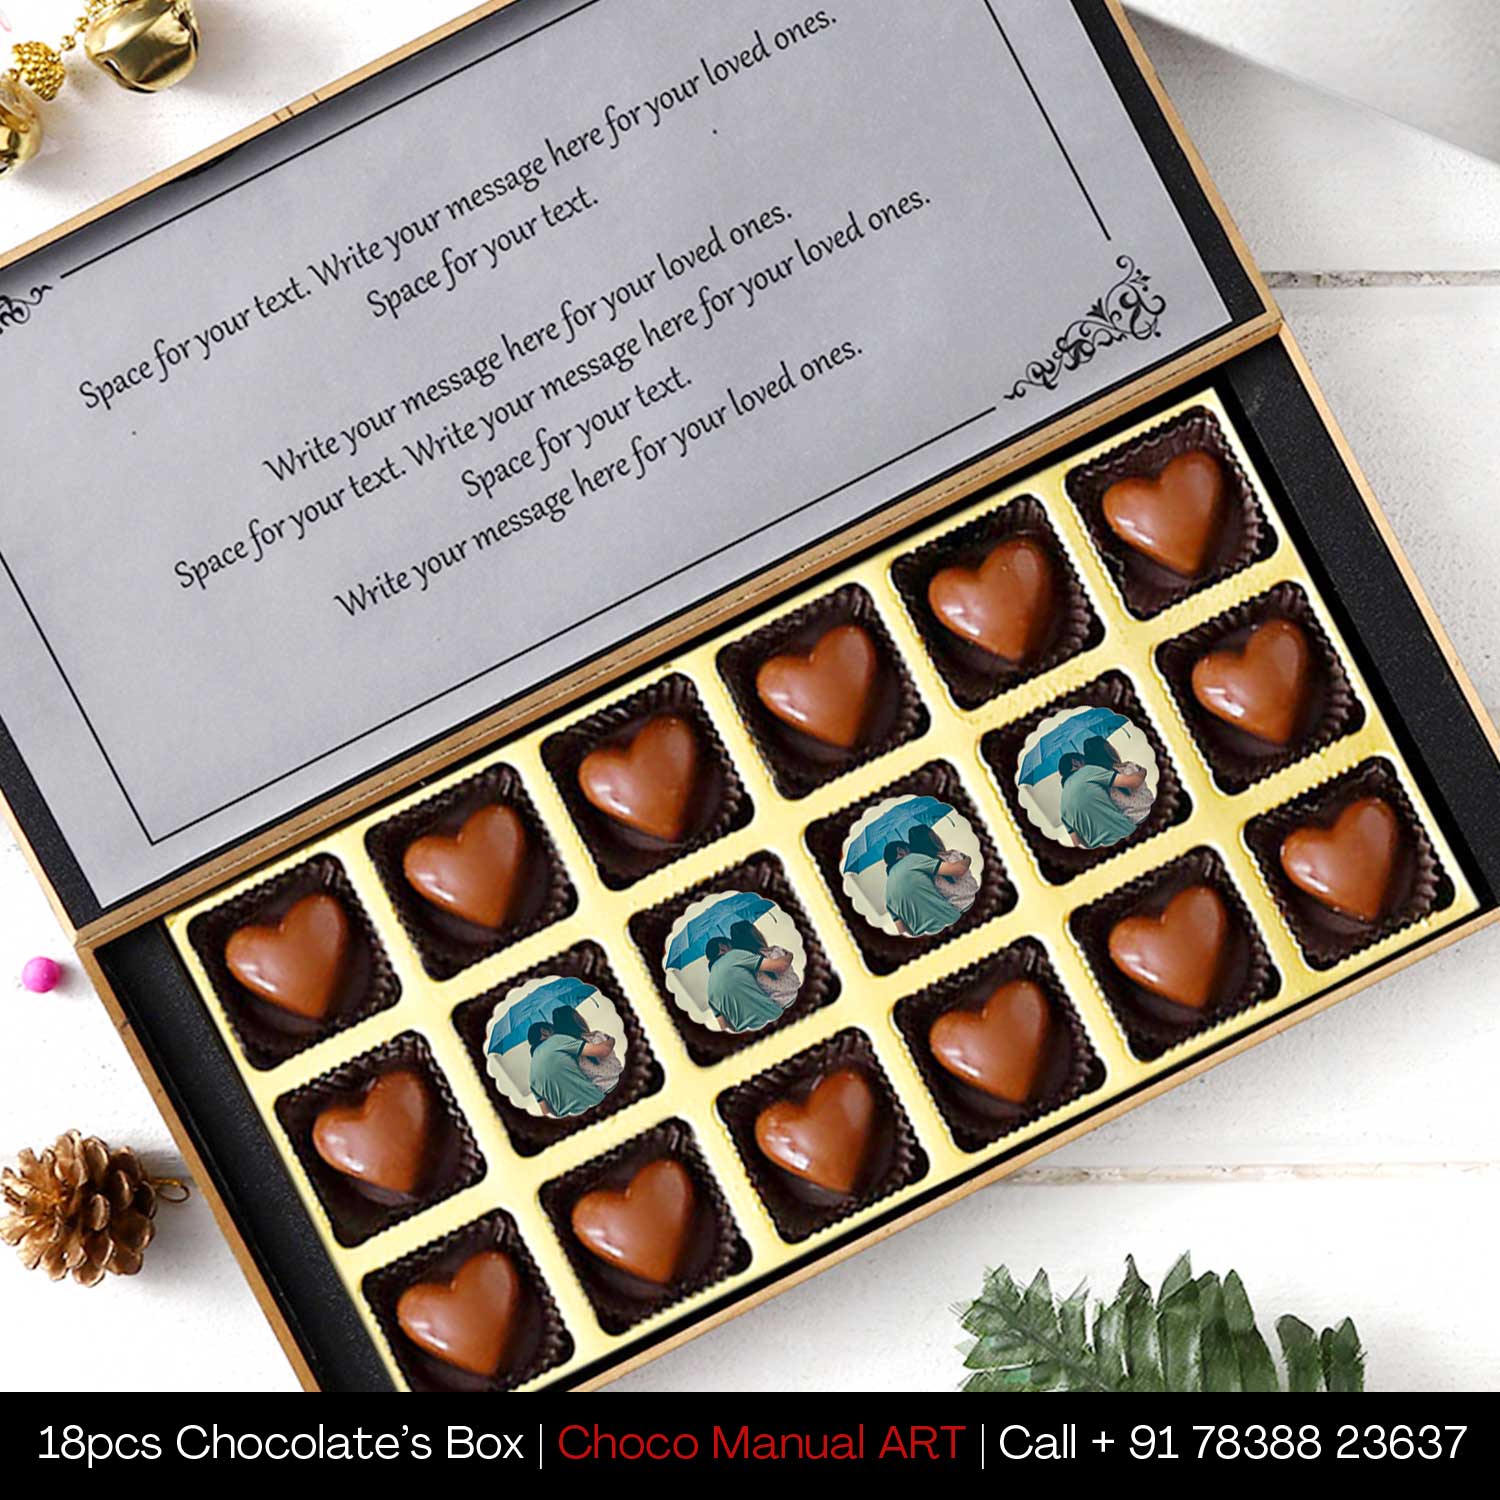 Propose Day Unique Chocolate gift I Buy at Choco ManualART